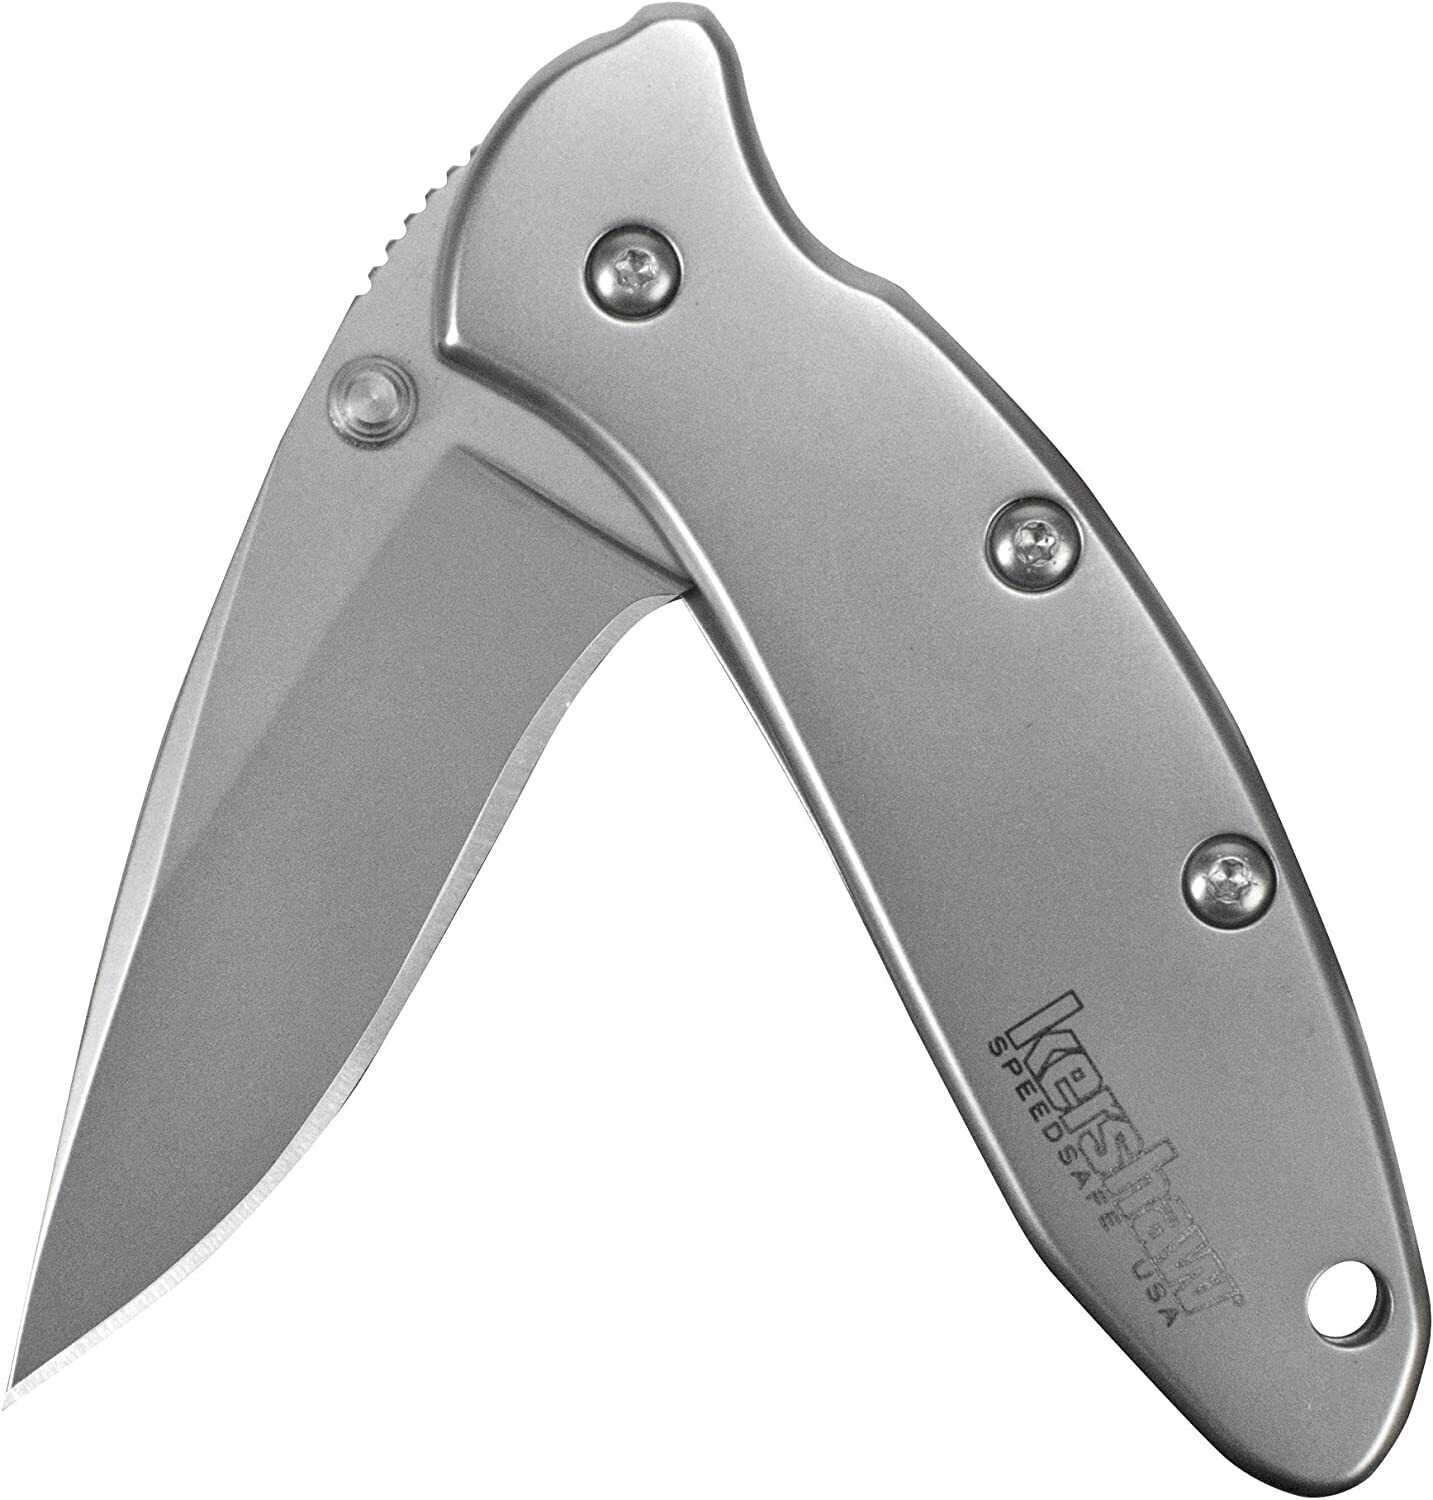 Kershaw 1600 Chive Assisted Opening Folding Knife, 1.9" Blade, Stainless